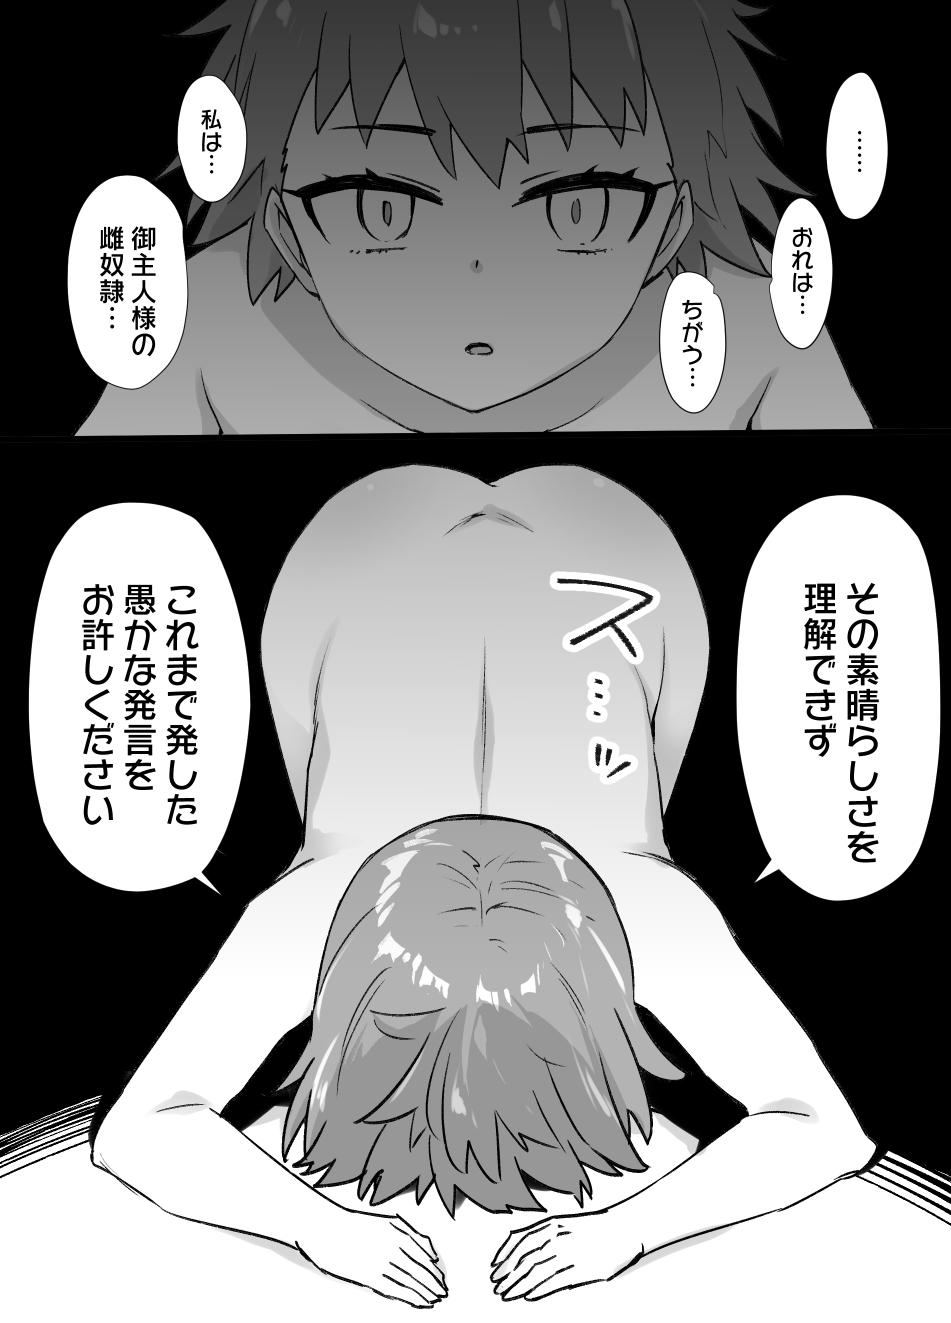 Celebrity Porn A manga about Shirou Emiya who went to save Rin Tohsaka from captivity and is transformed into a female slave through physical feminization and brainwashing[Fate/ stay night) - Fate stay night Fucked Hard - Page 6